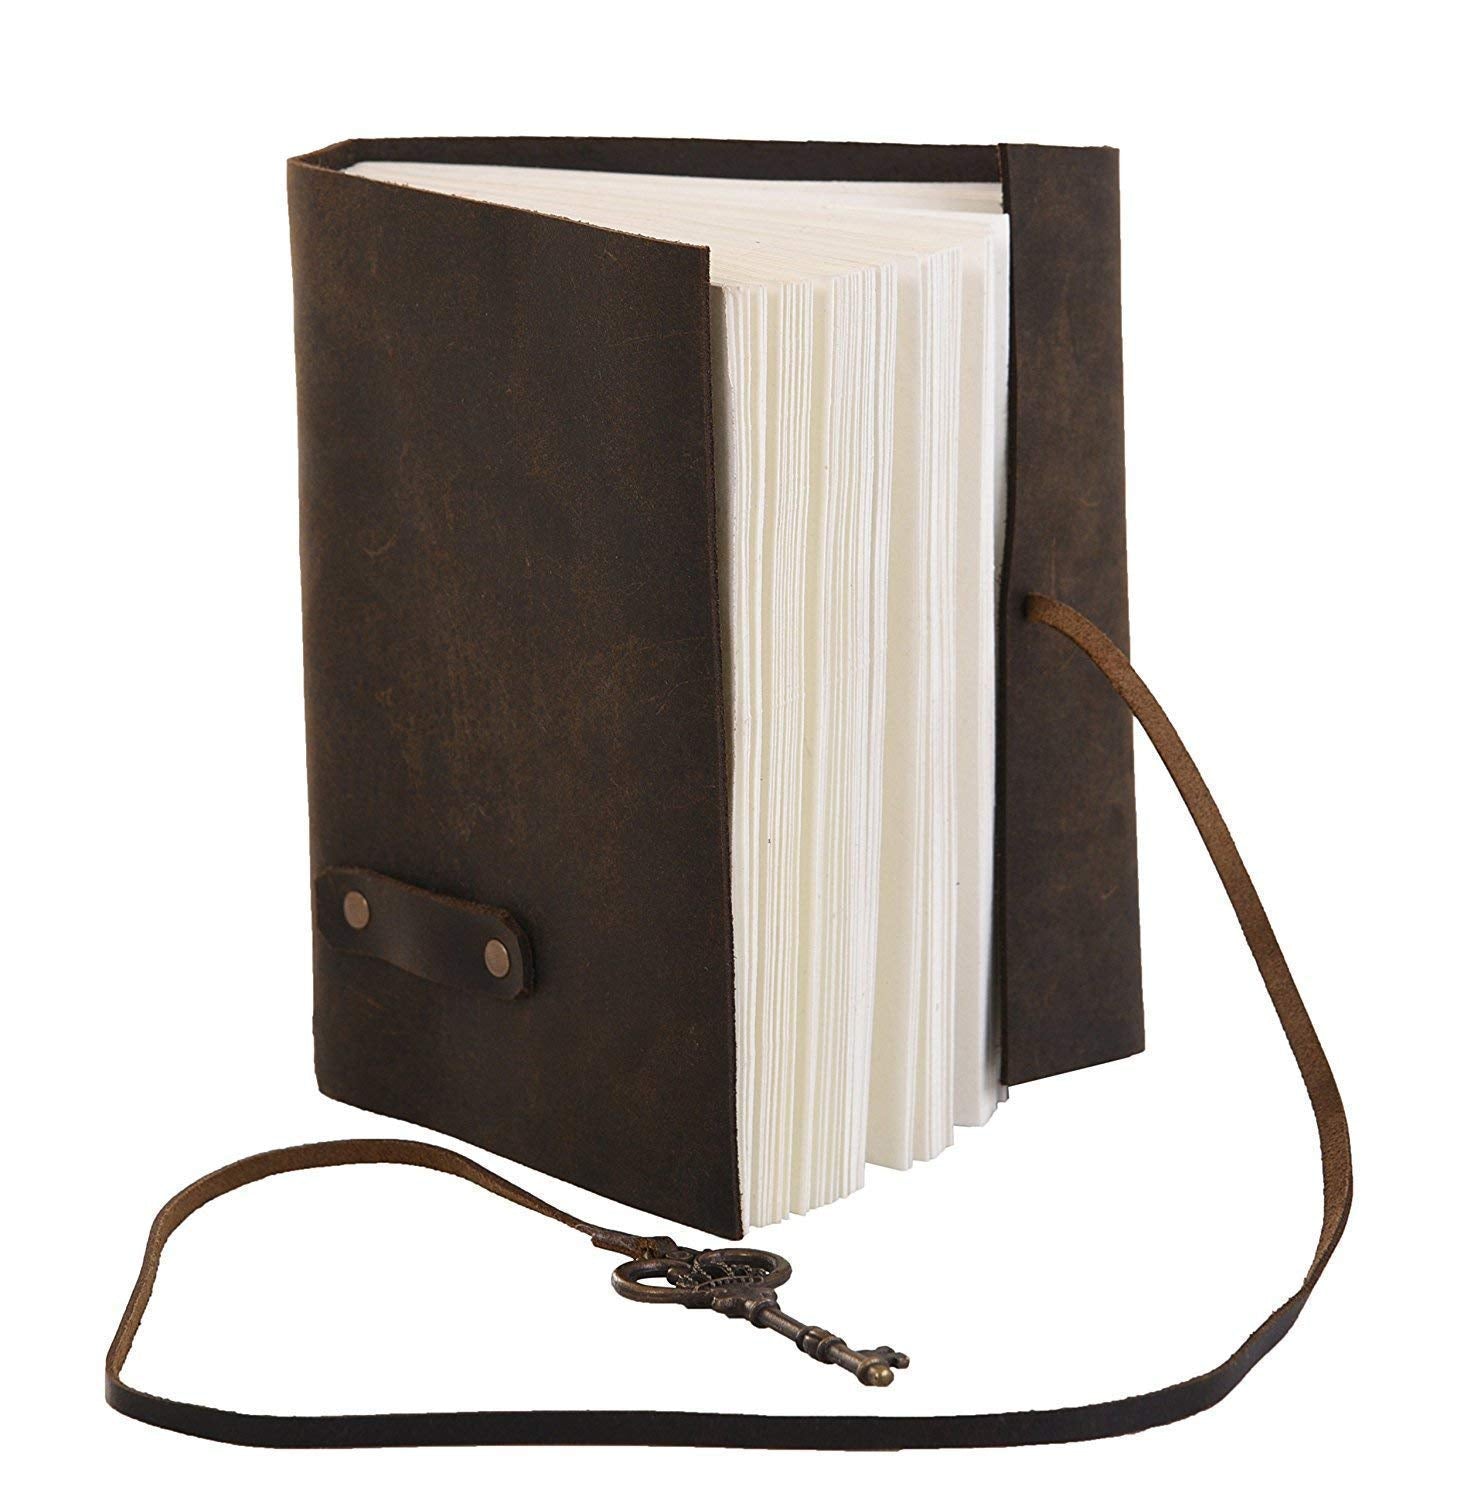 Handmade Embossed Travel leather Journal with Key Rope